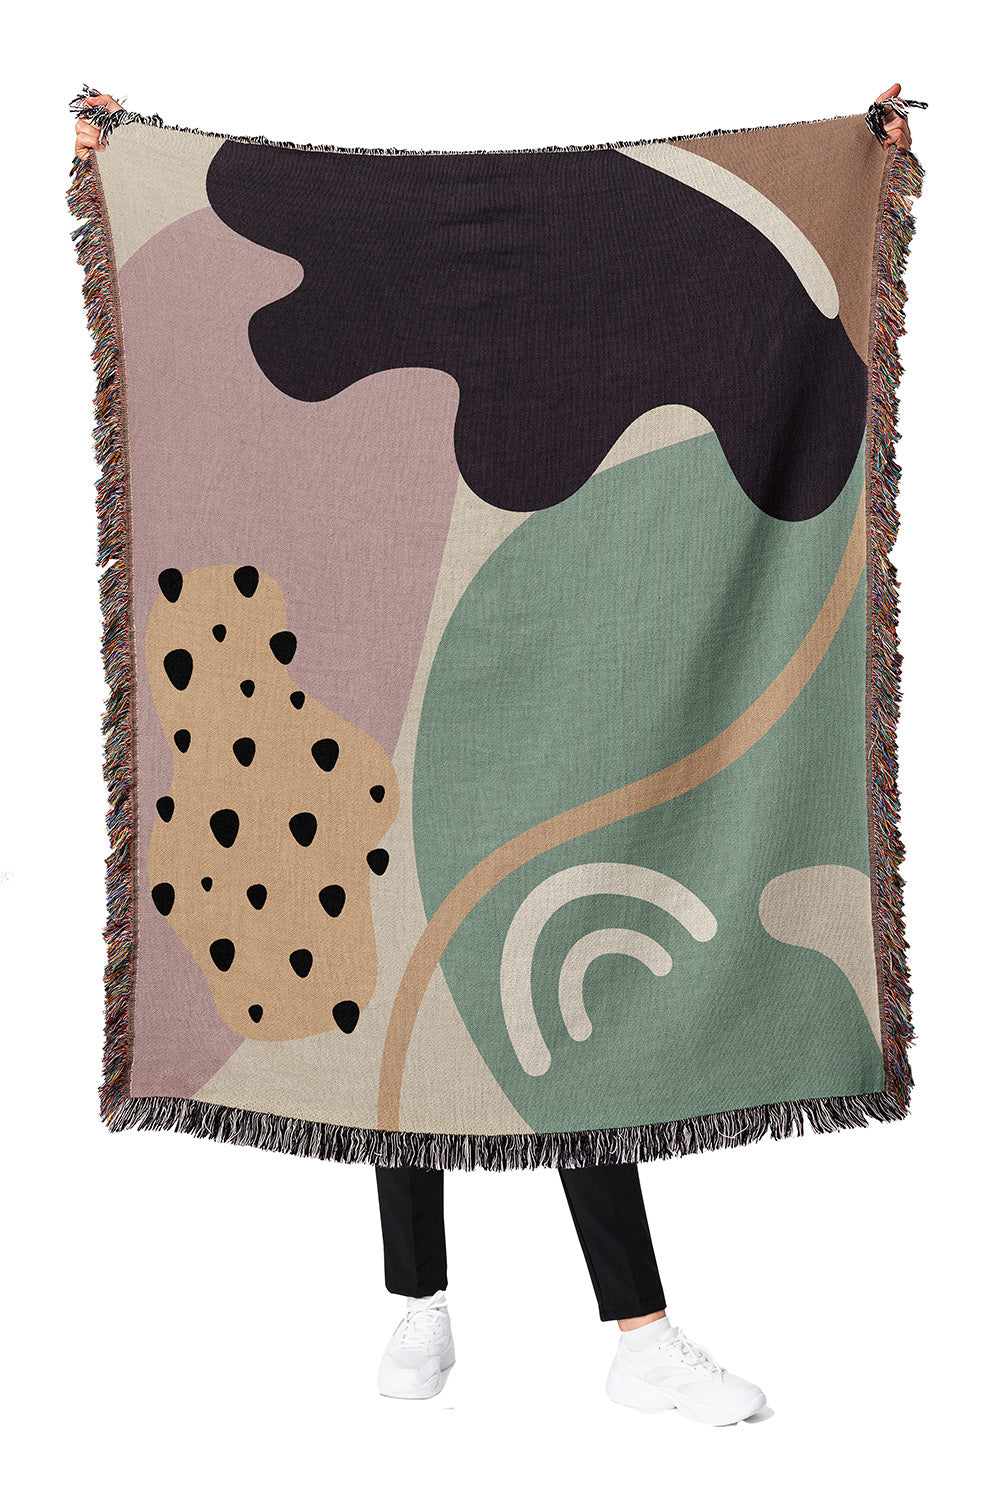 Retro-Futuristic Cotton Woven Throw Blanket in dusty pink, sage green, and cream with fringe edges.